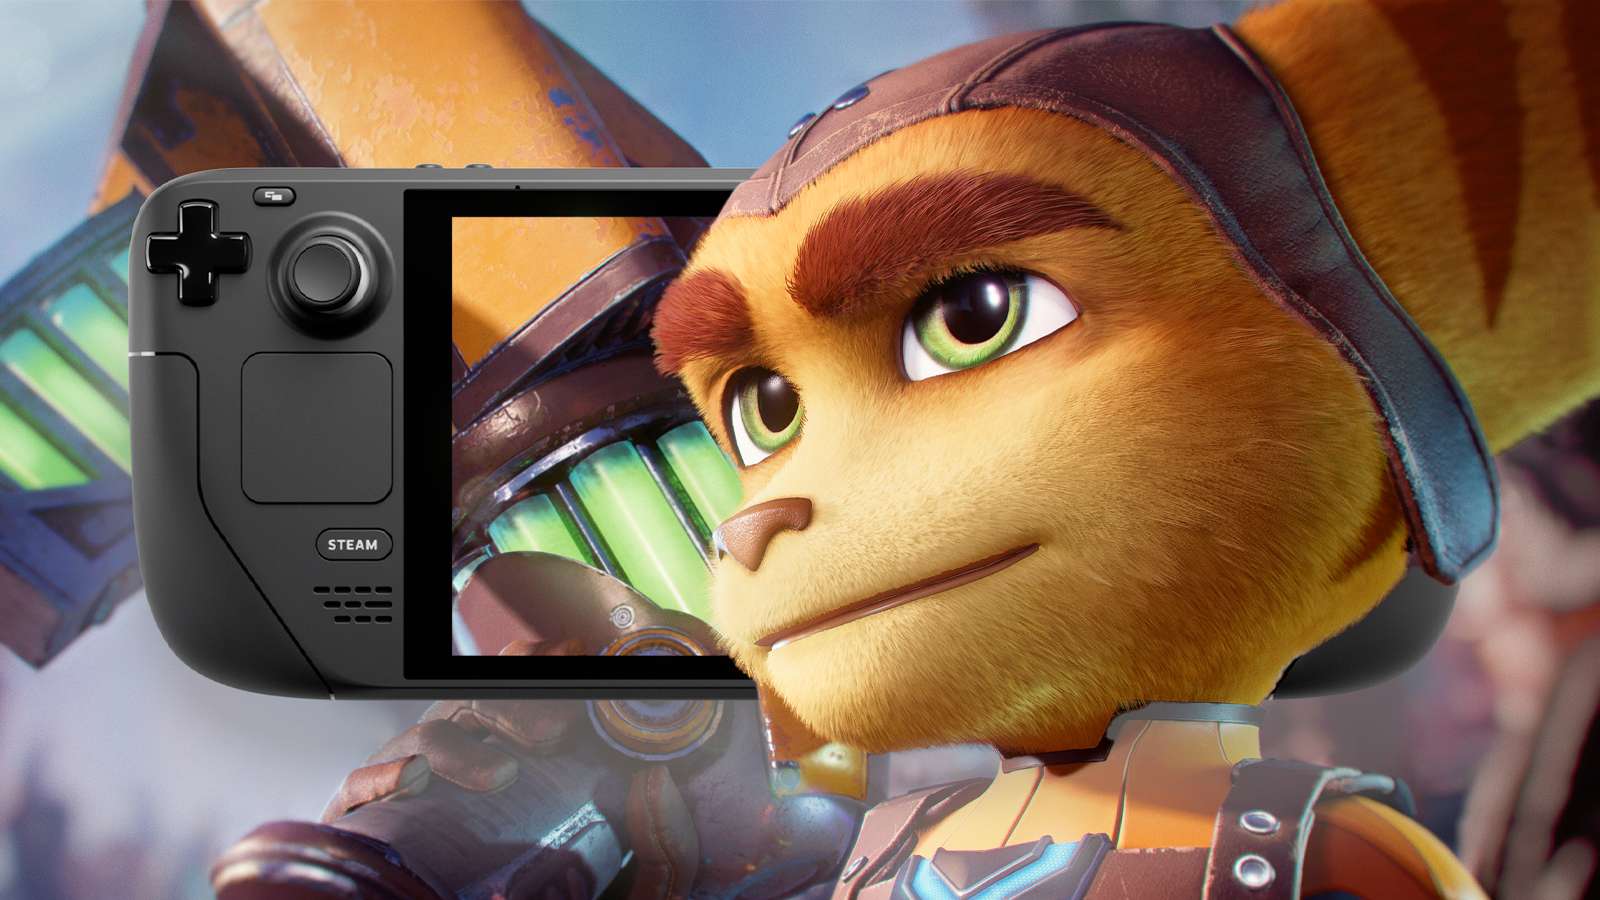 ratchet and clank key art on steam deck